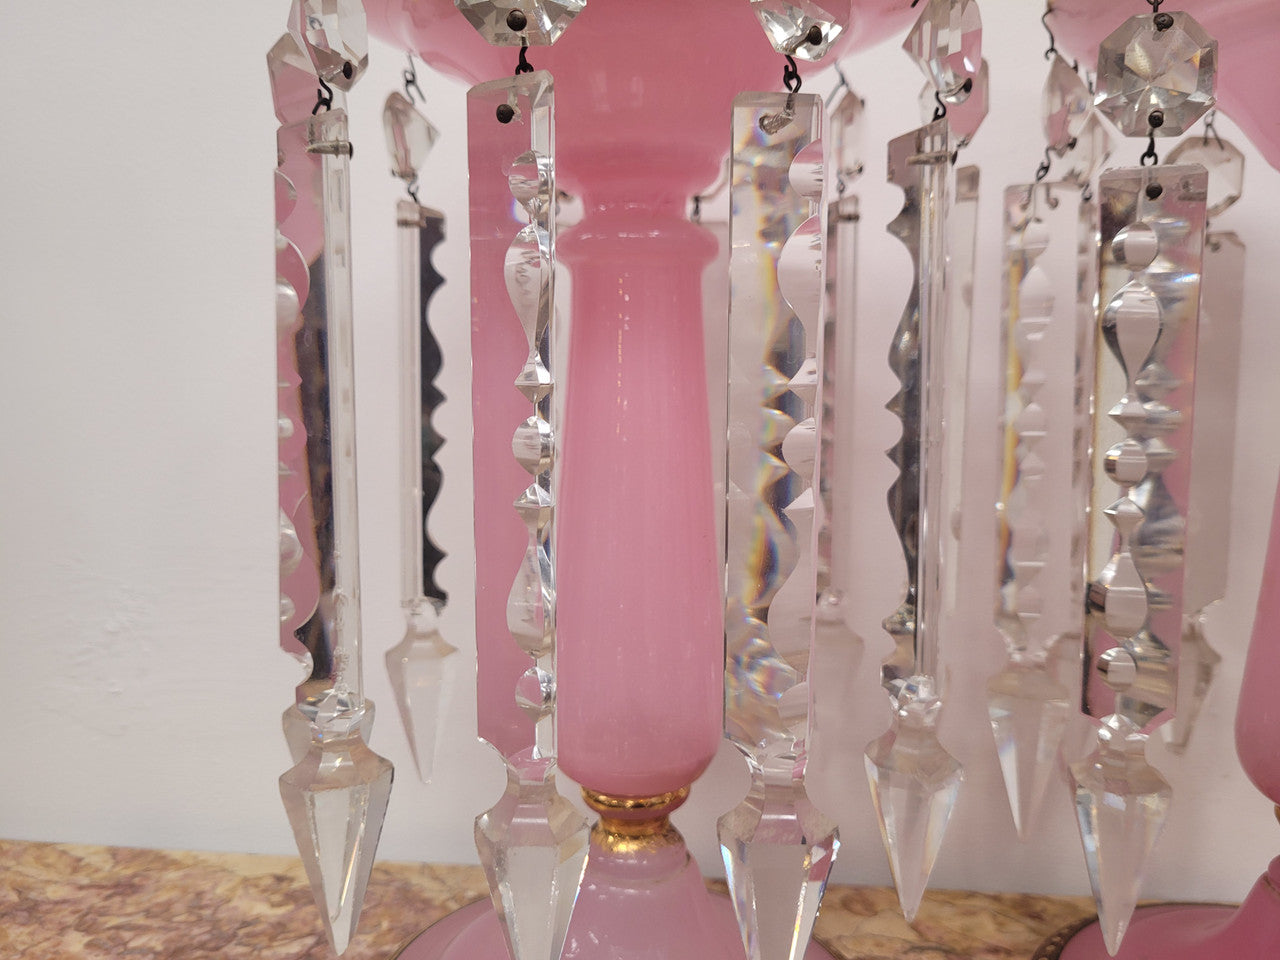 Large Victorian pink glass an gilt trim crystals lusters. It is in good original condition, please view photos as they help form part of the description.